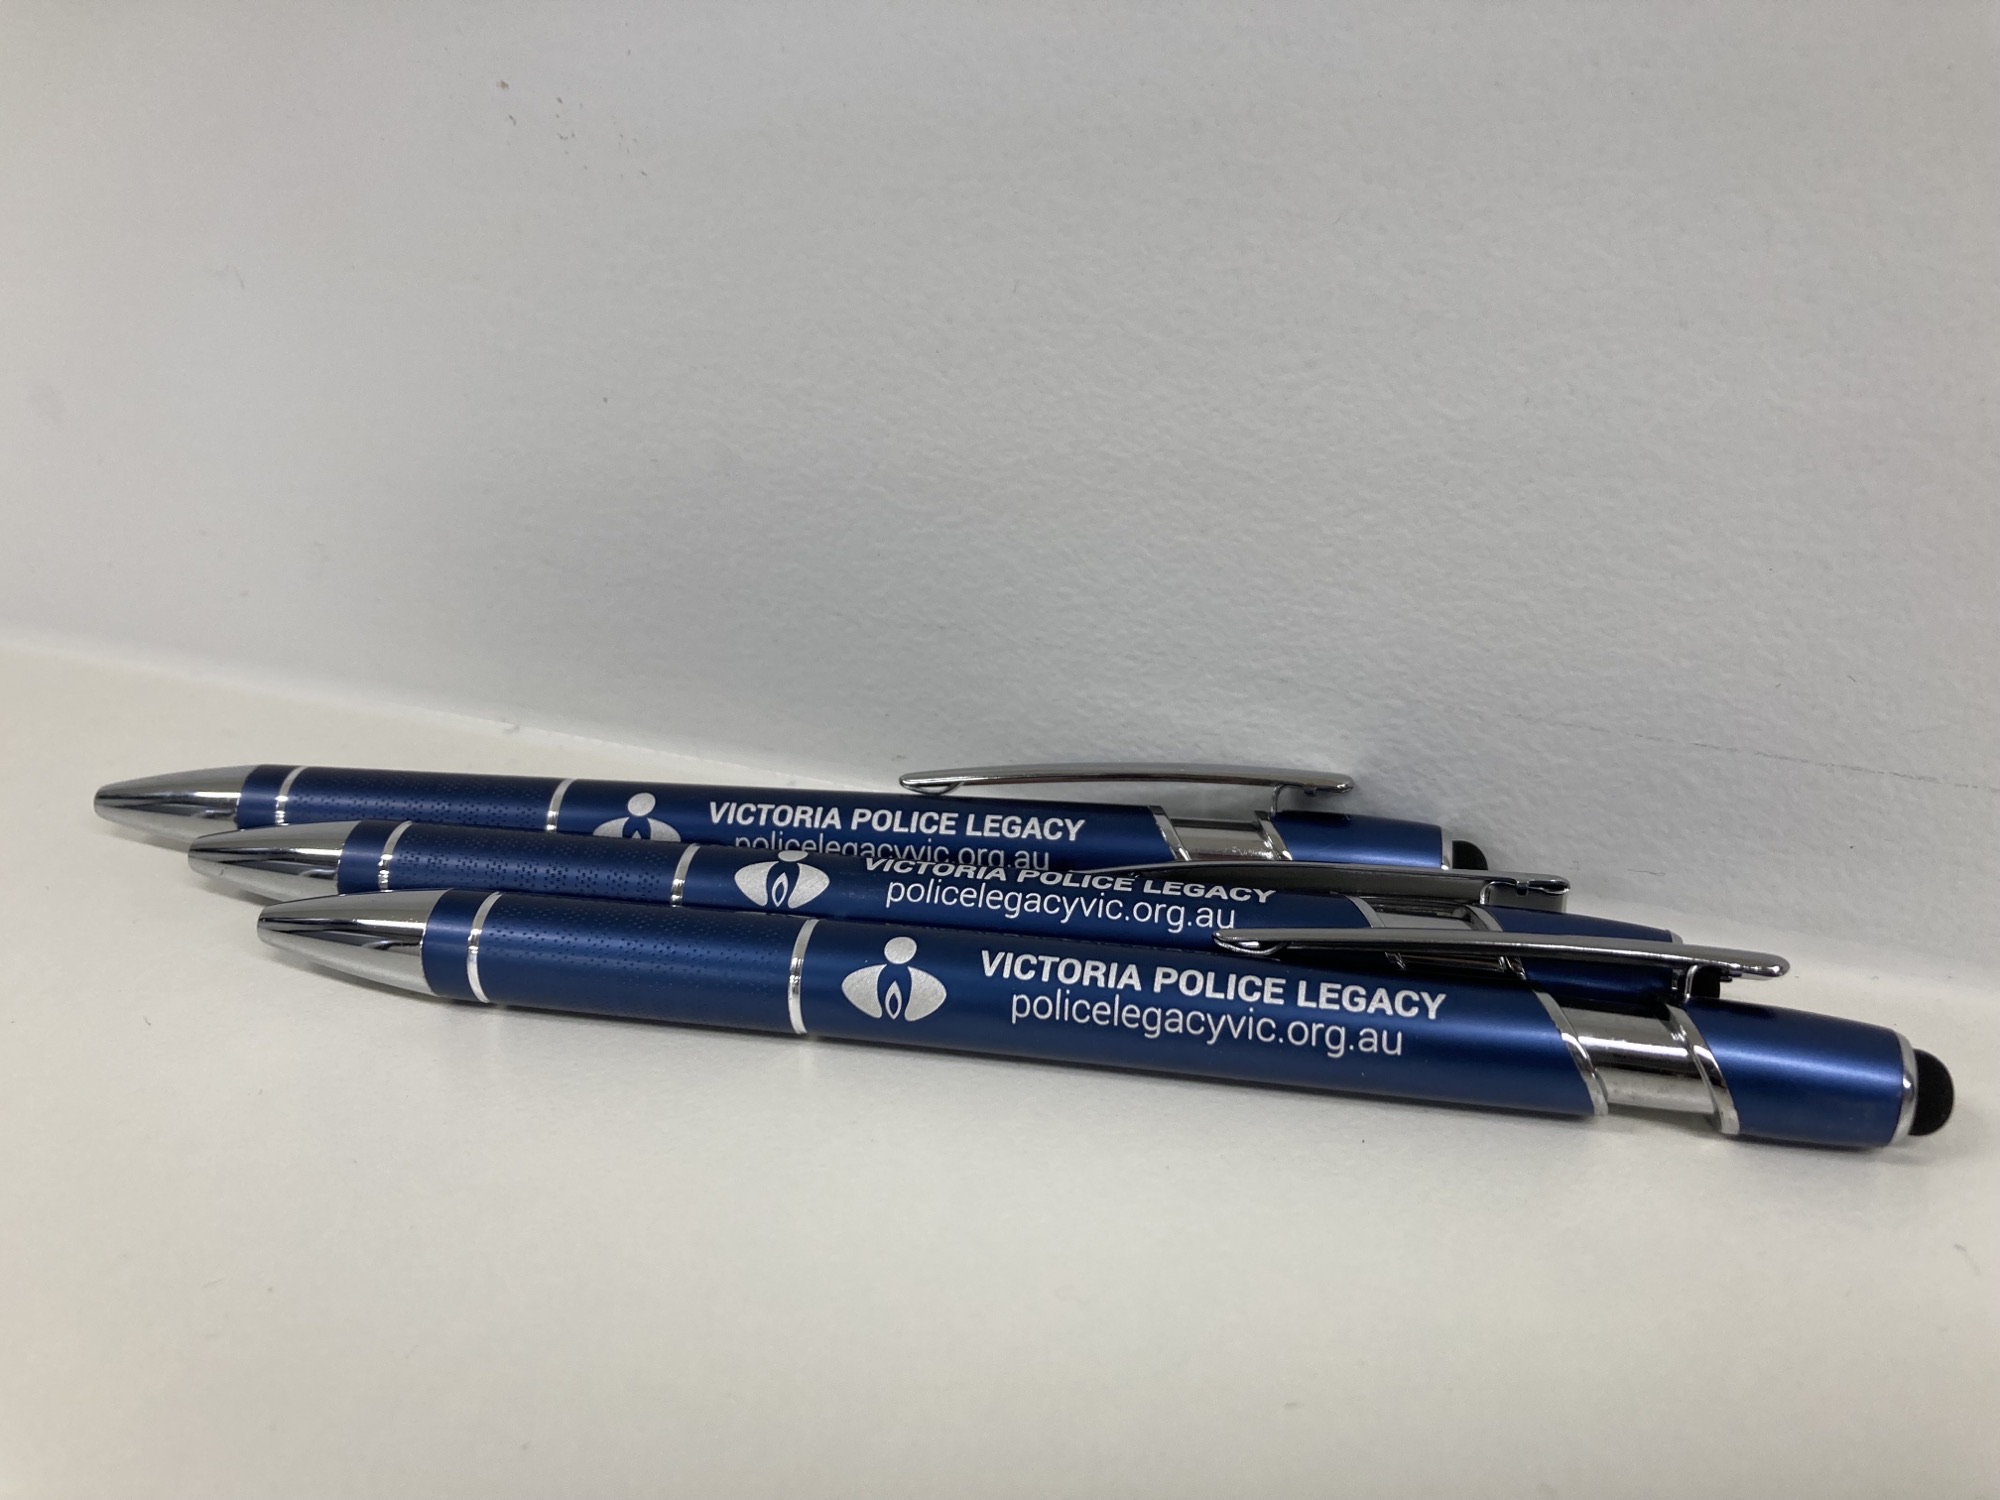 Victoria Police Legacy Stylus Pens - without case